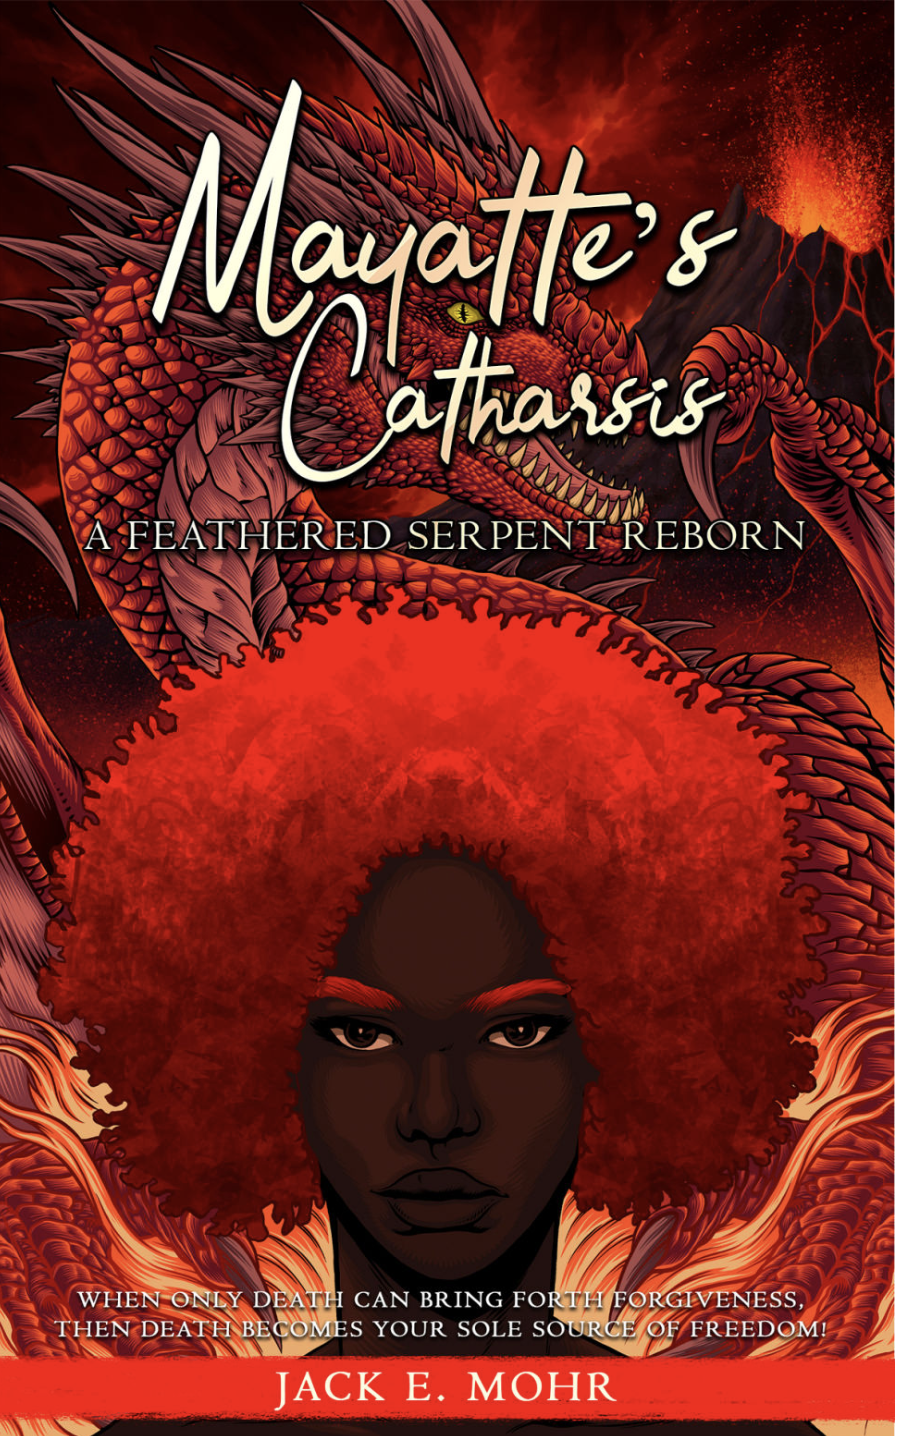 Mayatte's Catharsis by Jack E. Mohr